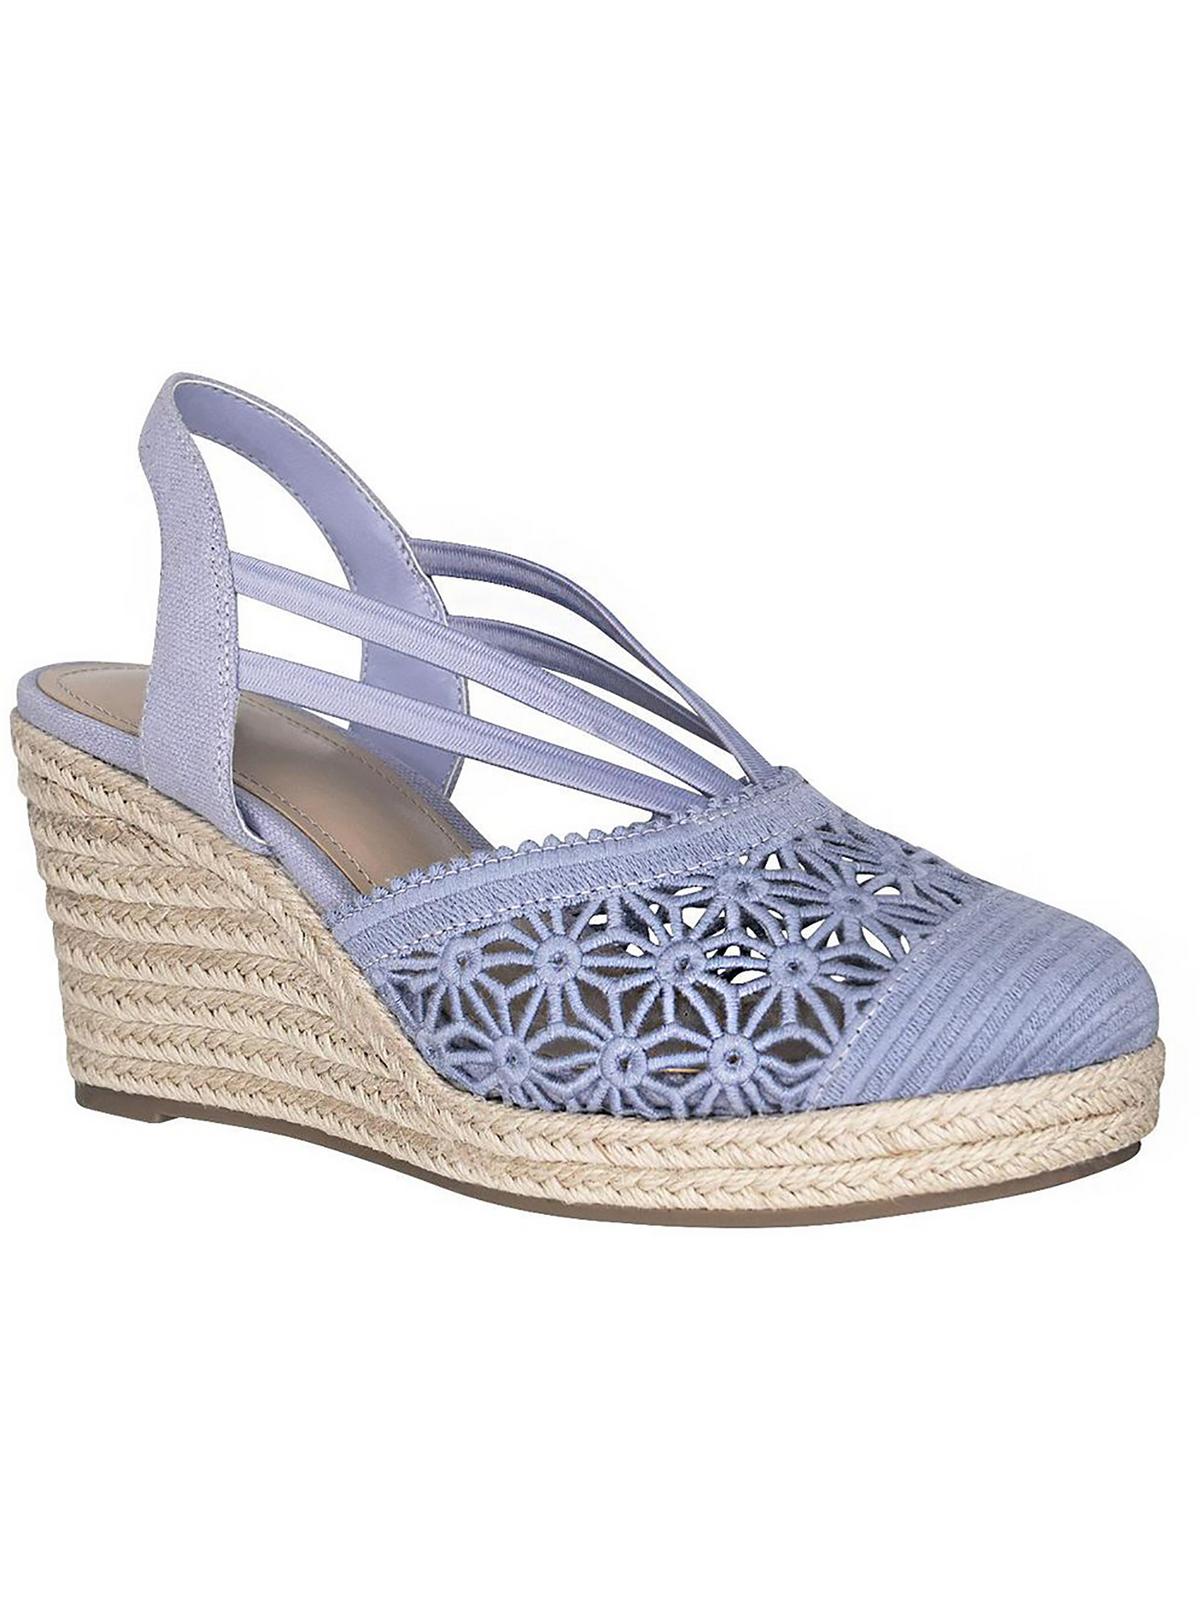 Impo Tonessa Womens Textured Scalloped Wedge Sandals In Purple